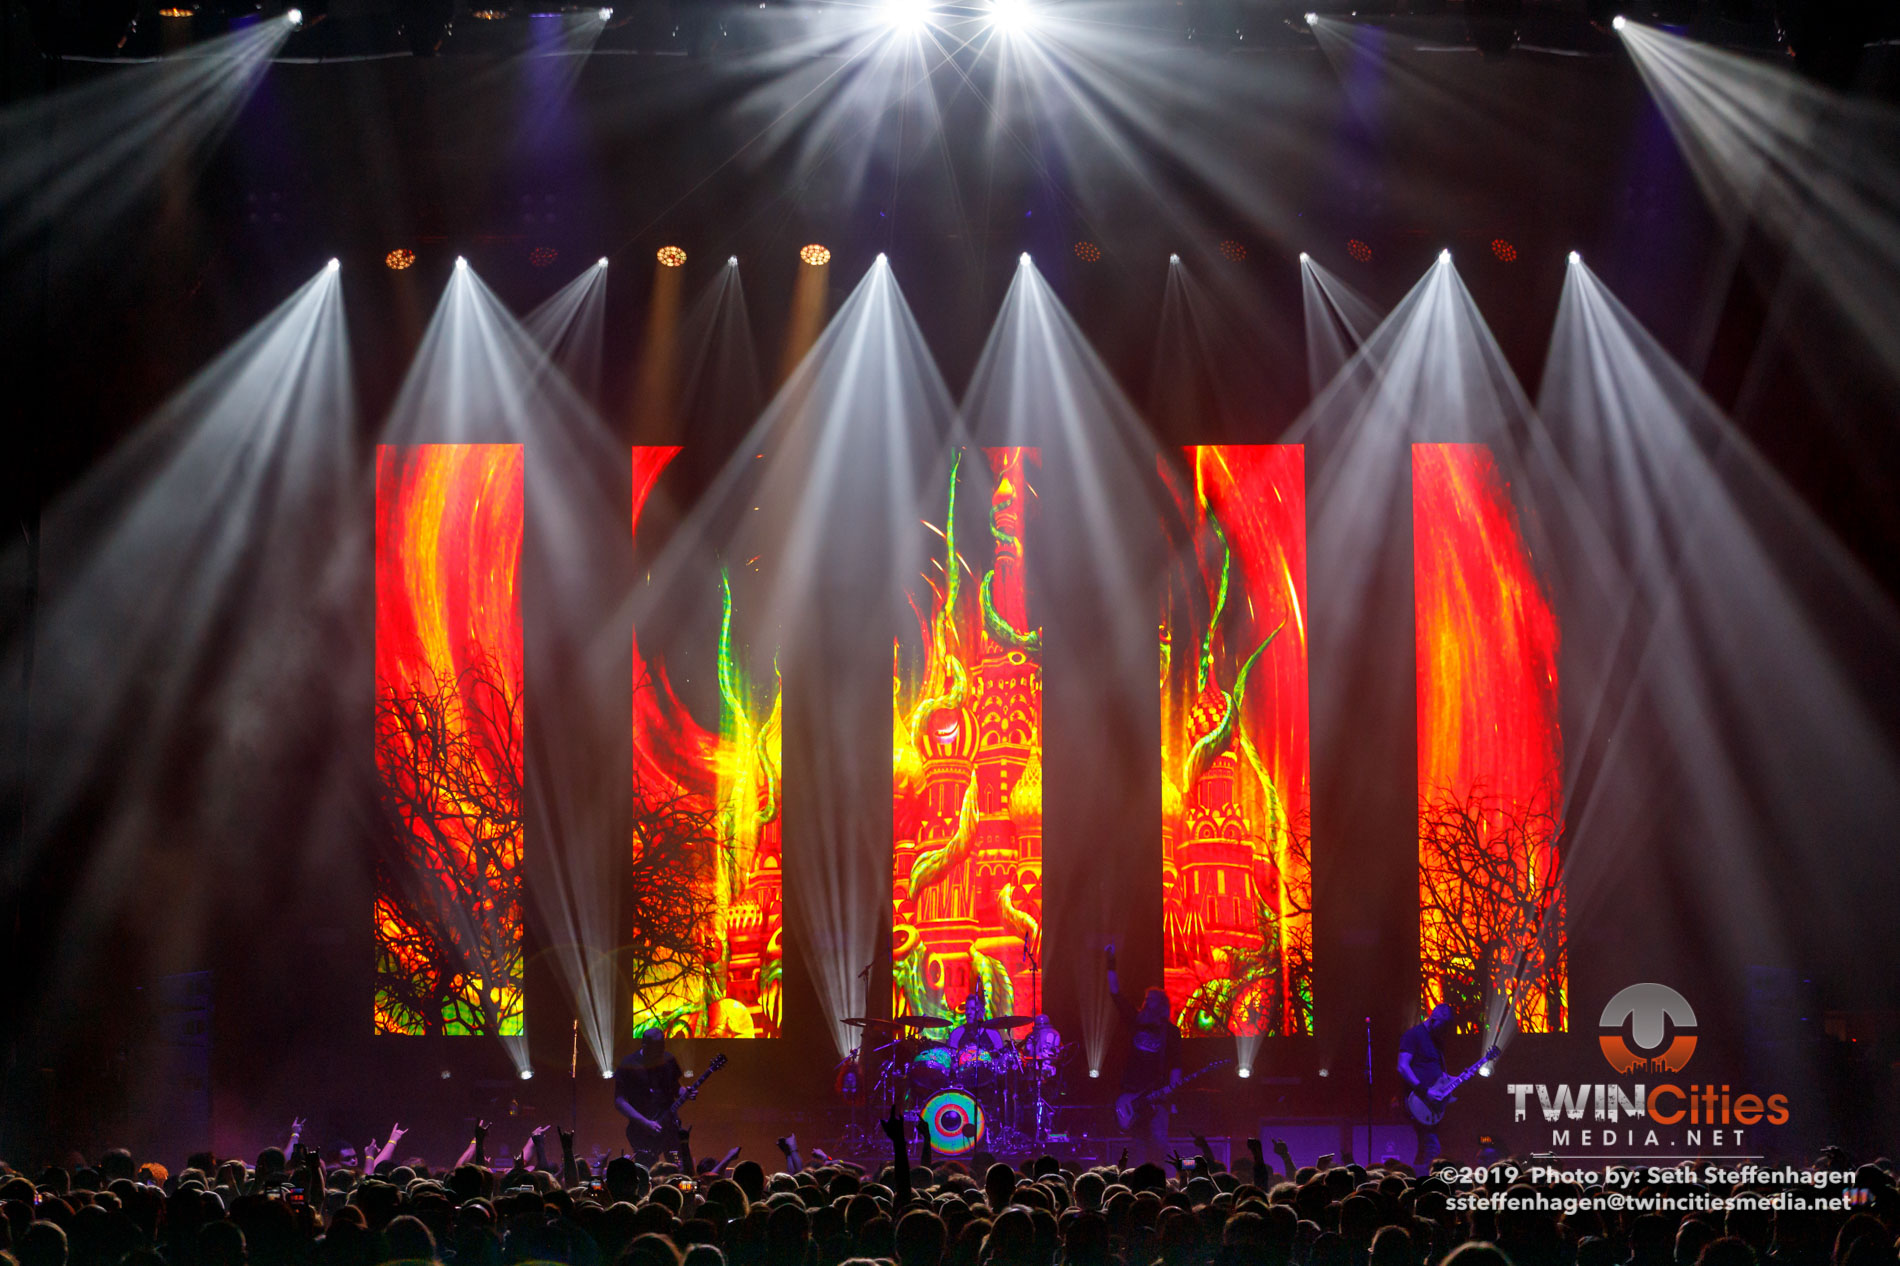 June 15, 2019 - Minneapolis, Minnesota, United States - Mastodon live in concert at The Armory along with Coheed & Cambria and Every Time I Die.(Photo by Seth Steffenhagen/Steffenhagen Photography)